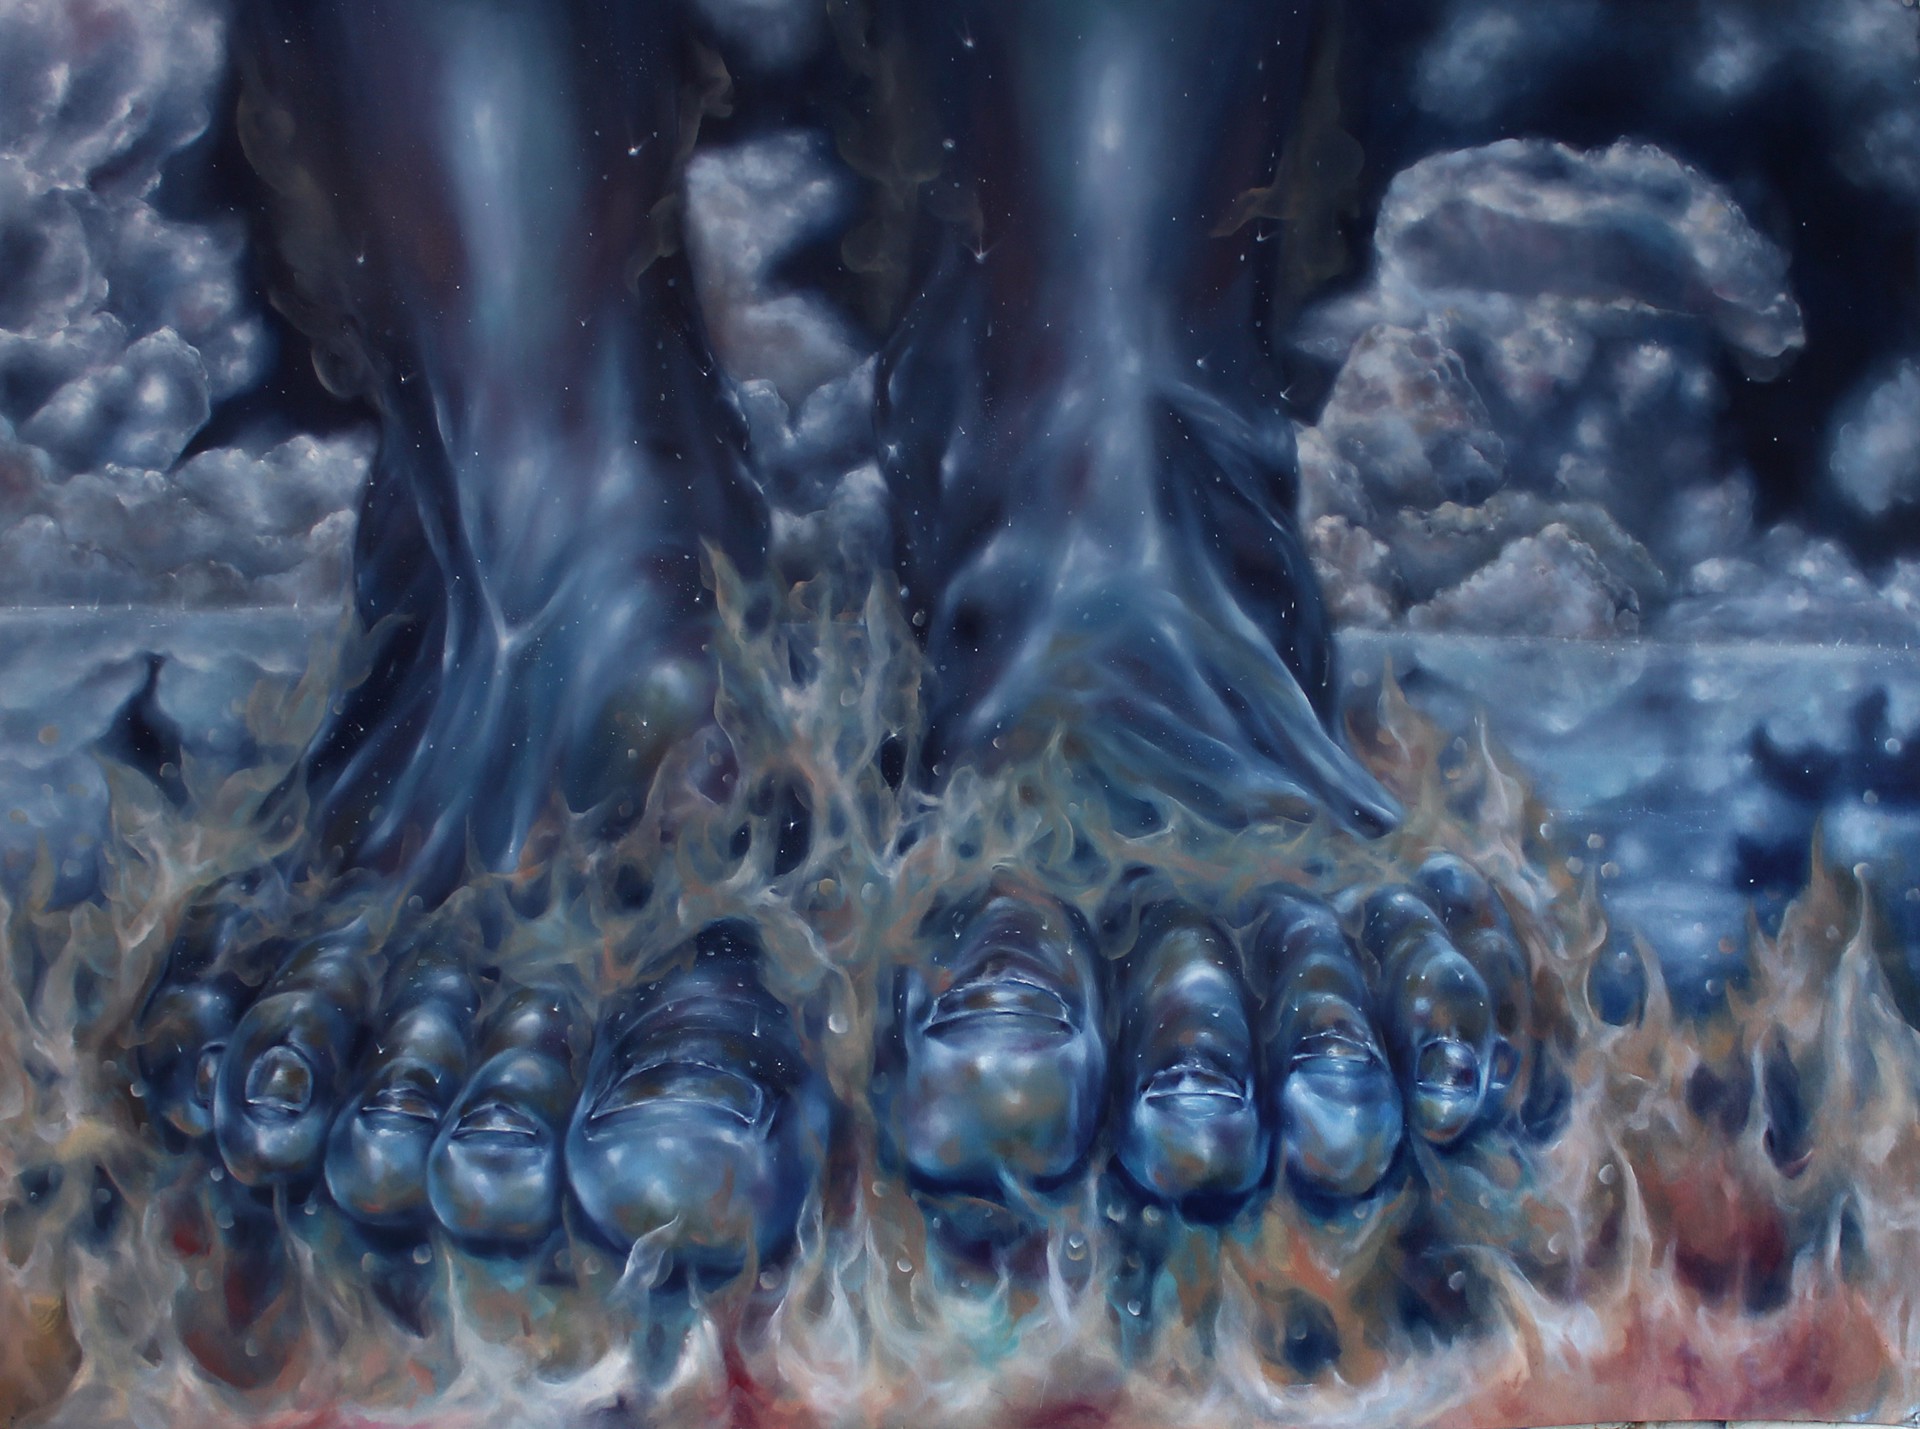 Feet of Ore, Celestial Fire on the Sea of Glass by Crystal Marshall